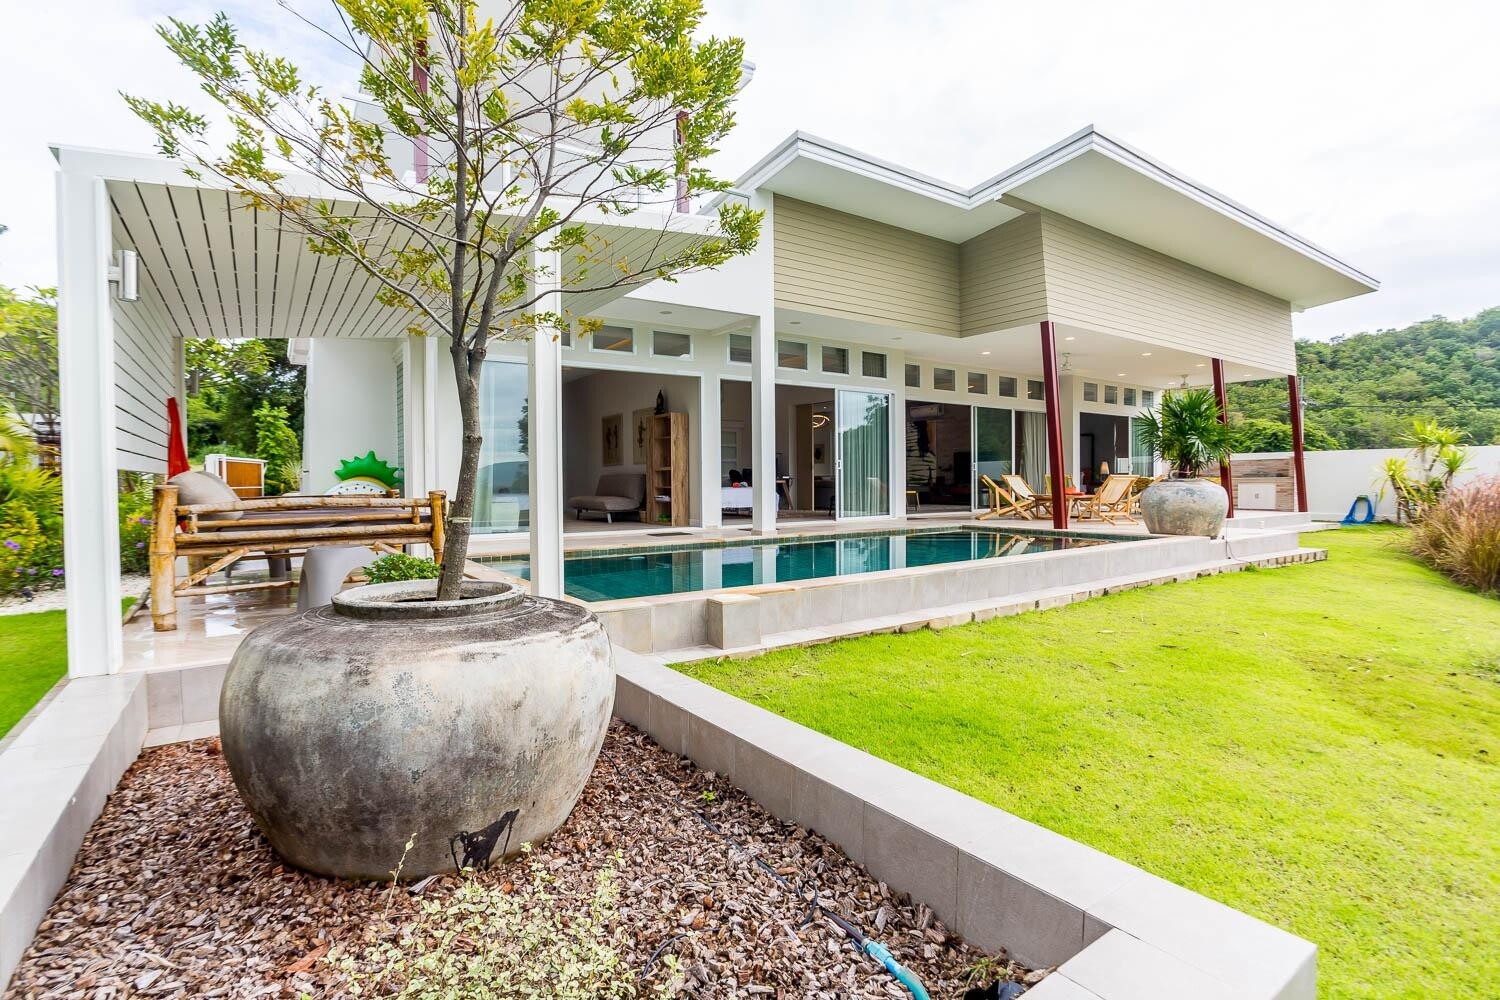 Modern style Pool Villa at Springfield Golf Course.